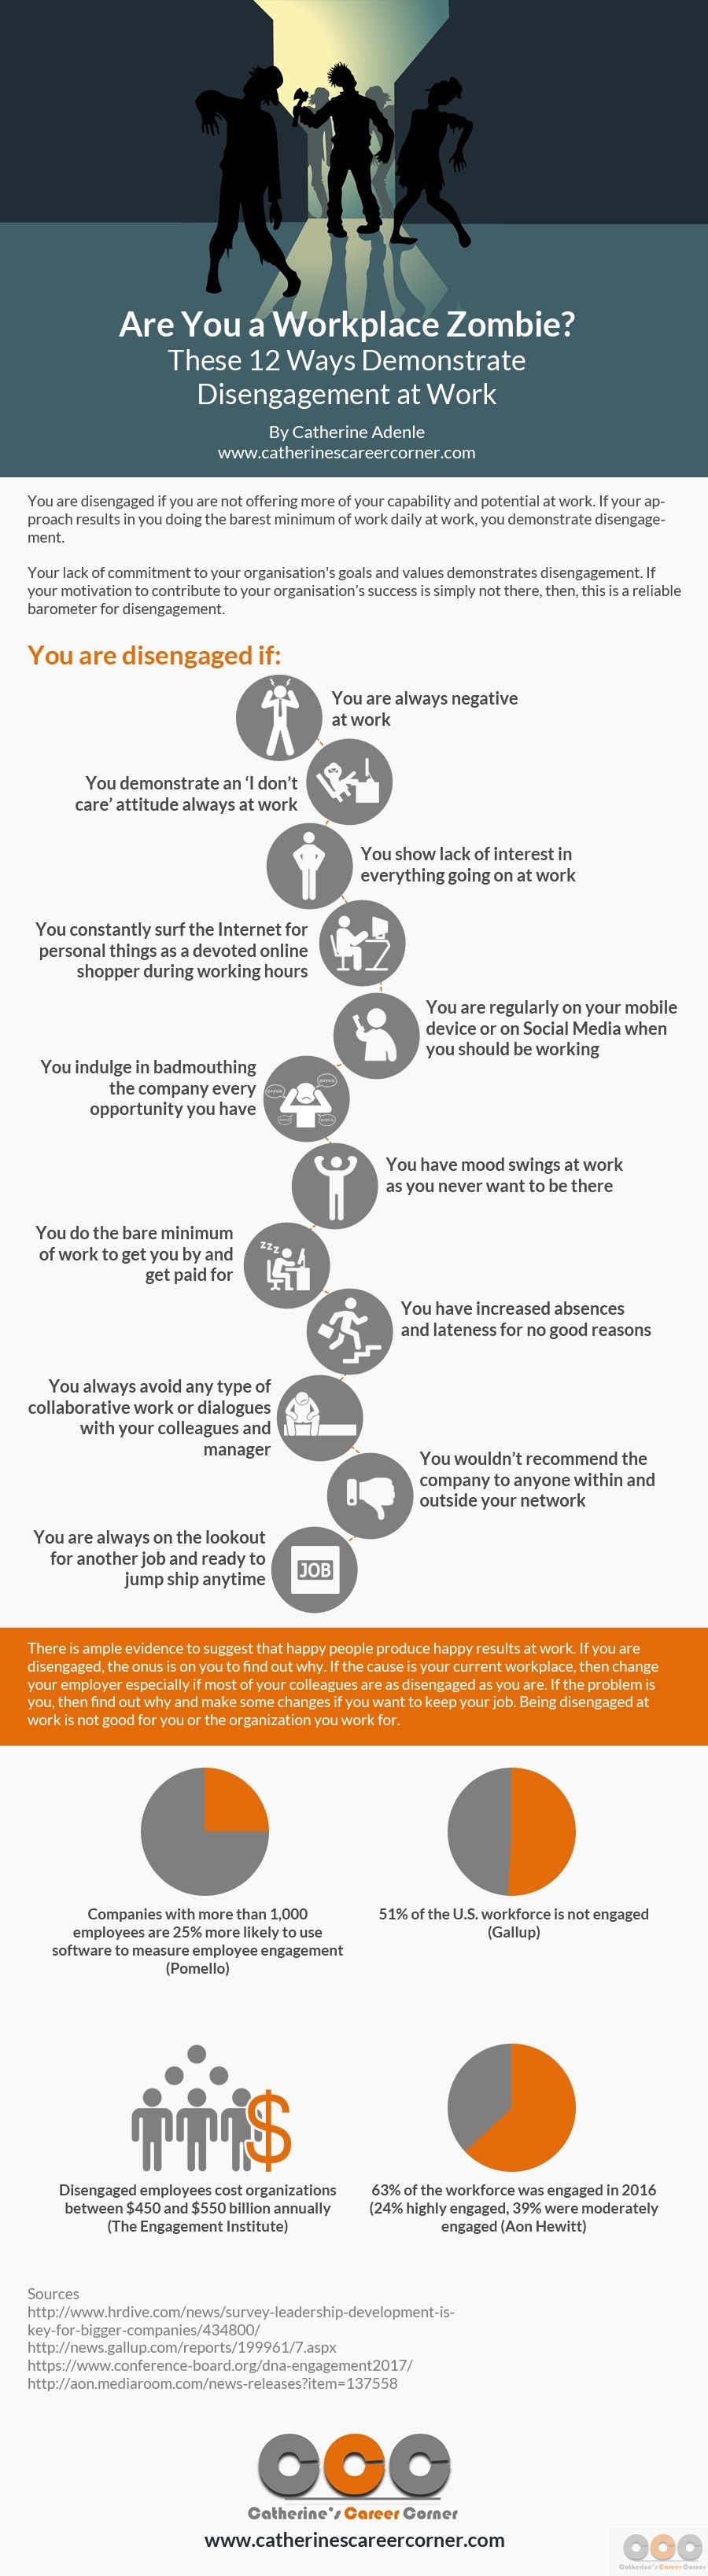 12 Ways You Demonstrate Disengagement at Work_Infographic